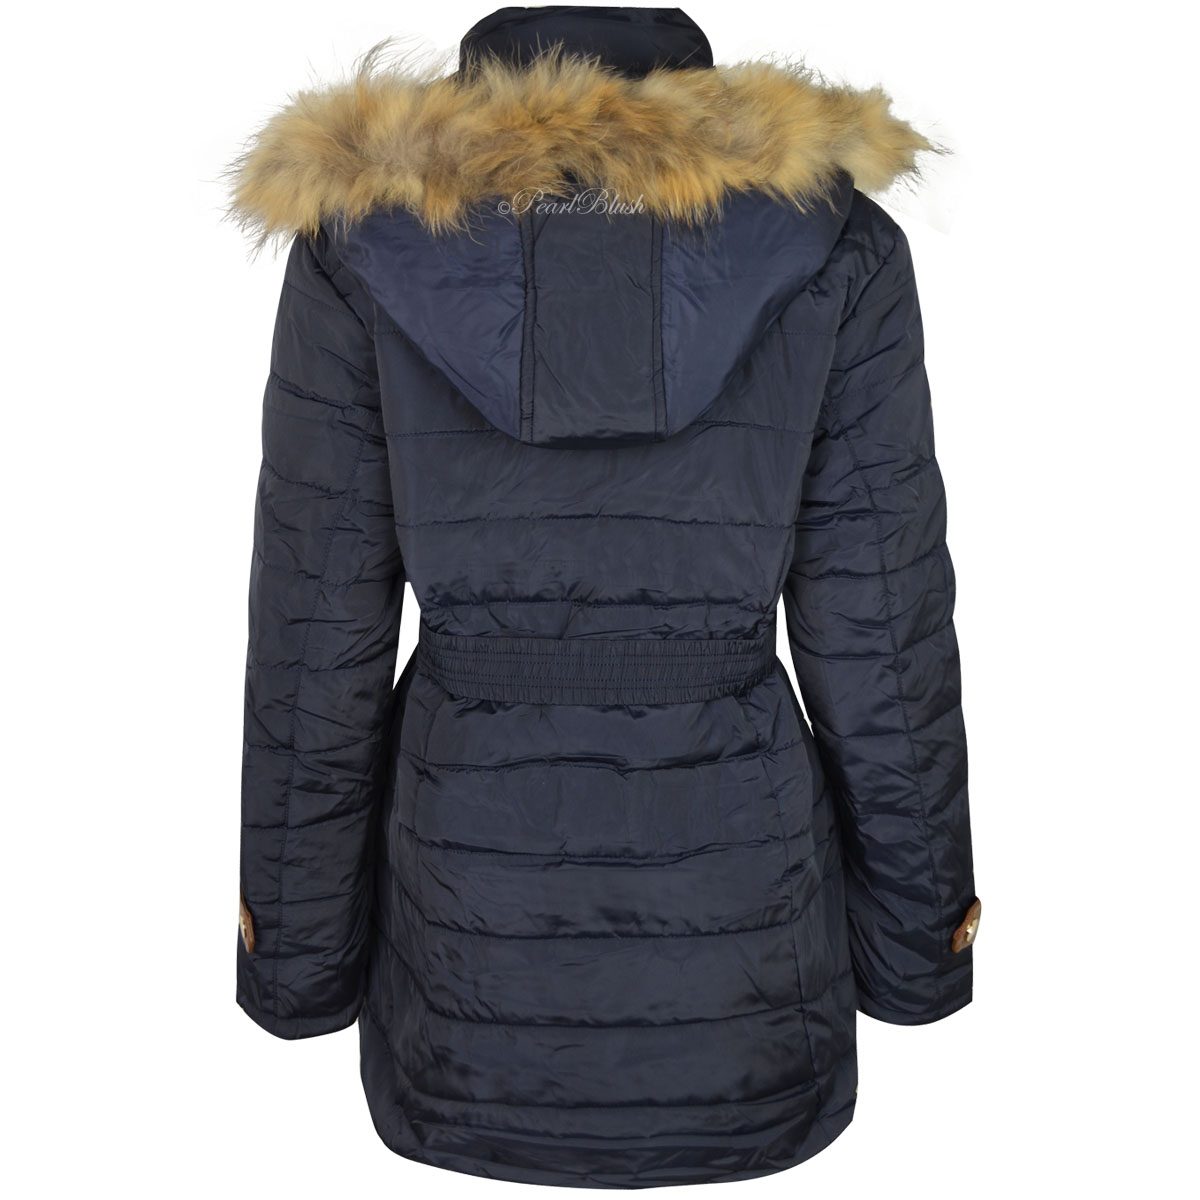 LADIES WOMENS PLUS SIZE FUR HOODED WINTER COAT QUILTED PADDED PUFFA PARKA JACKET | eBay